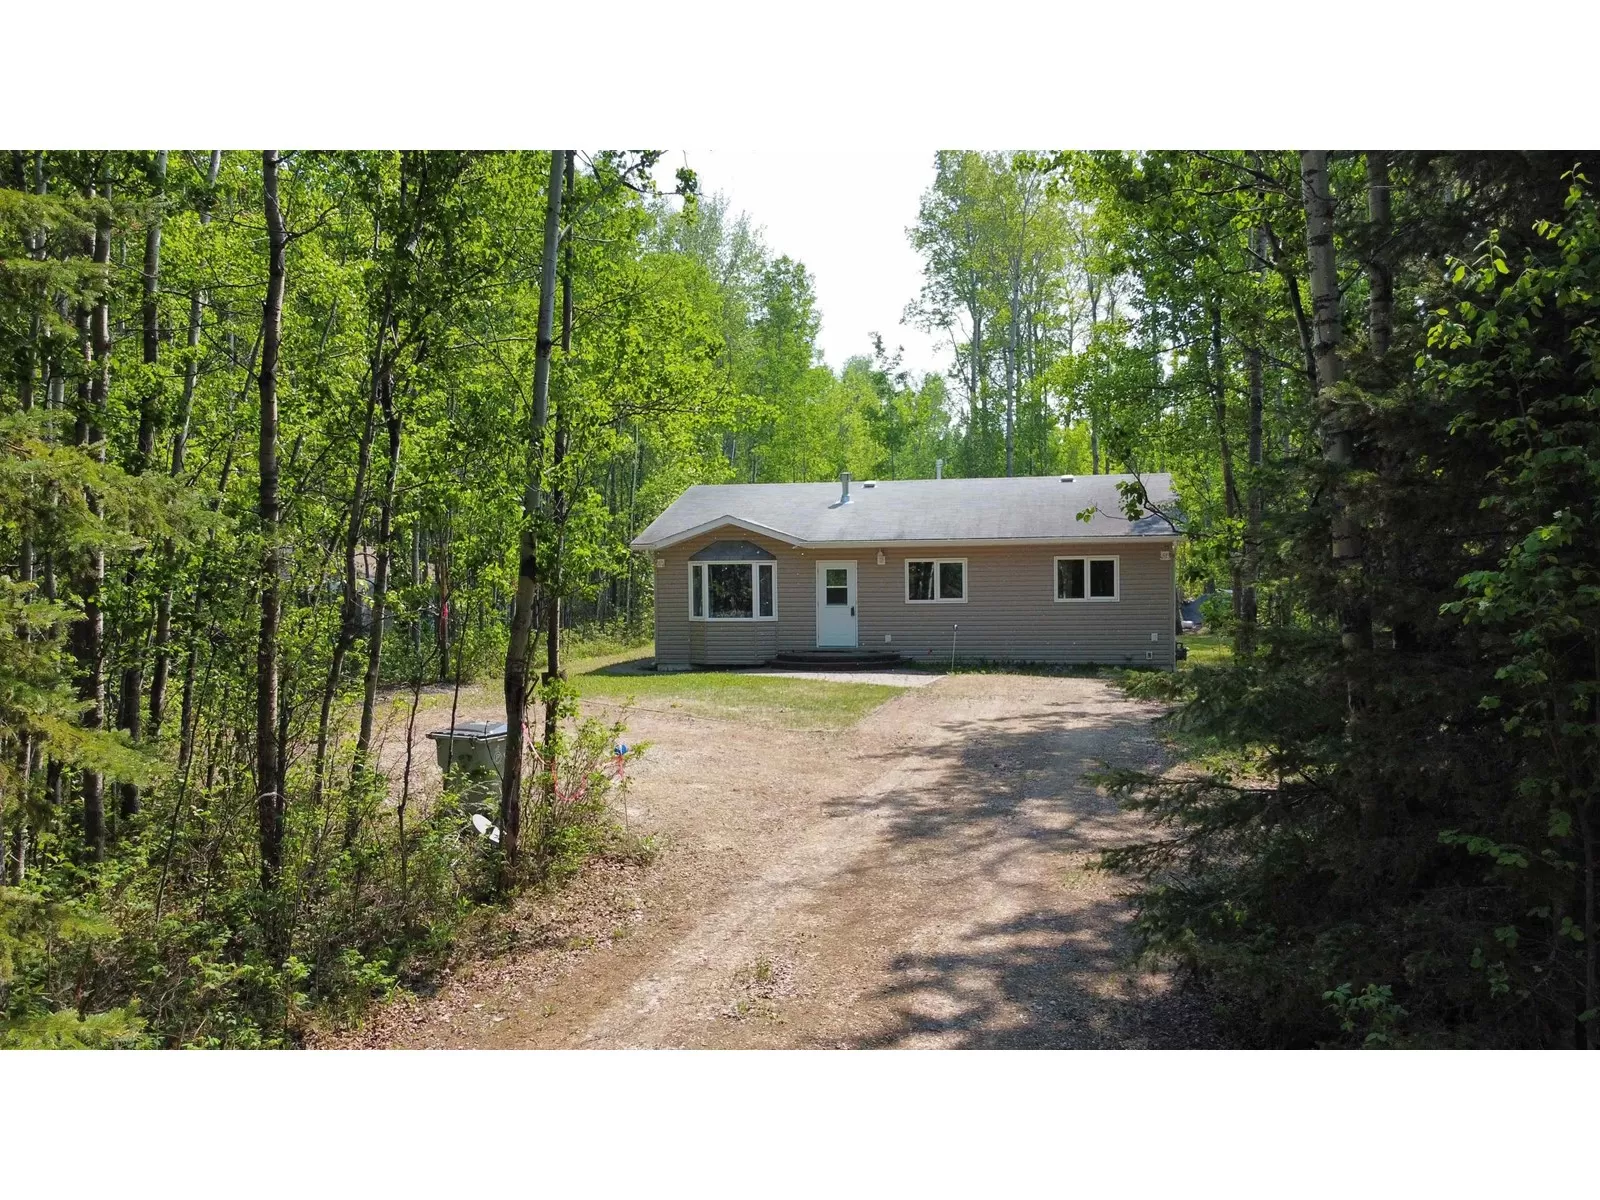 House for rent: B49 Days Dr, Rural Leduc County, Alberta T0C 2P0